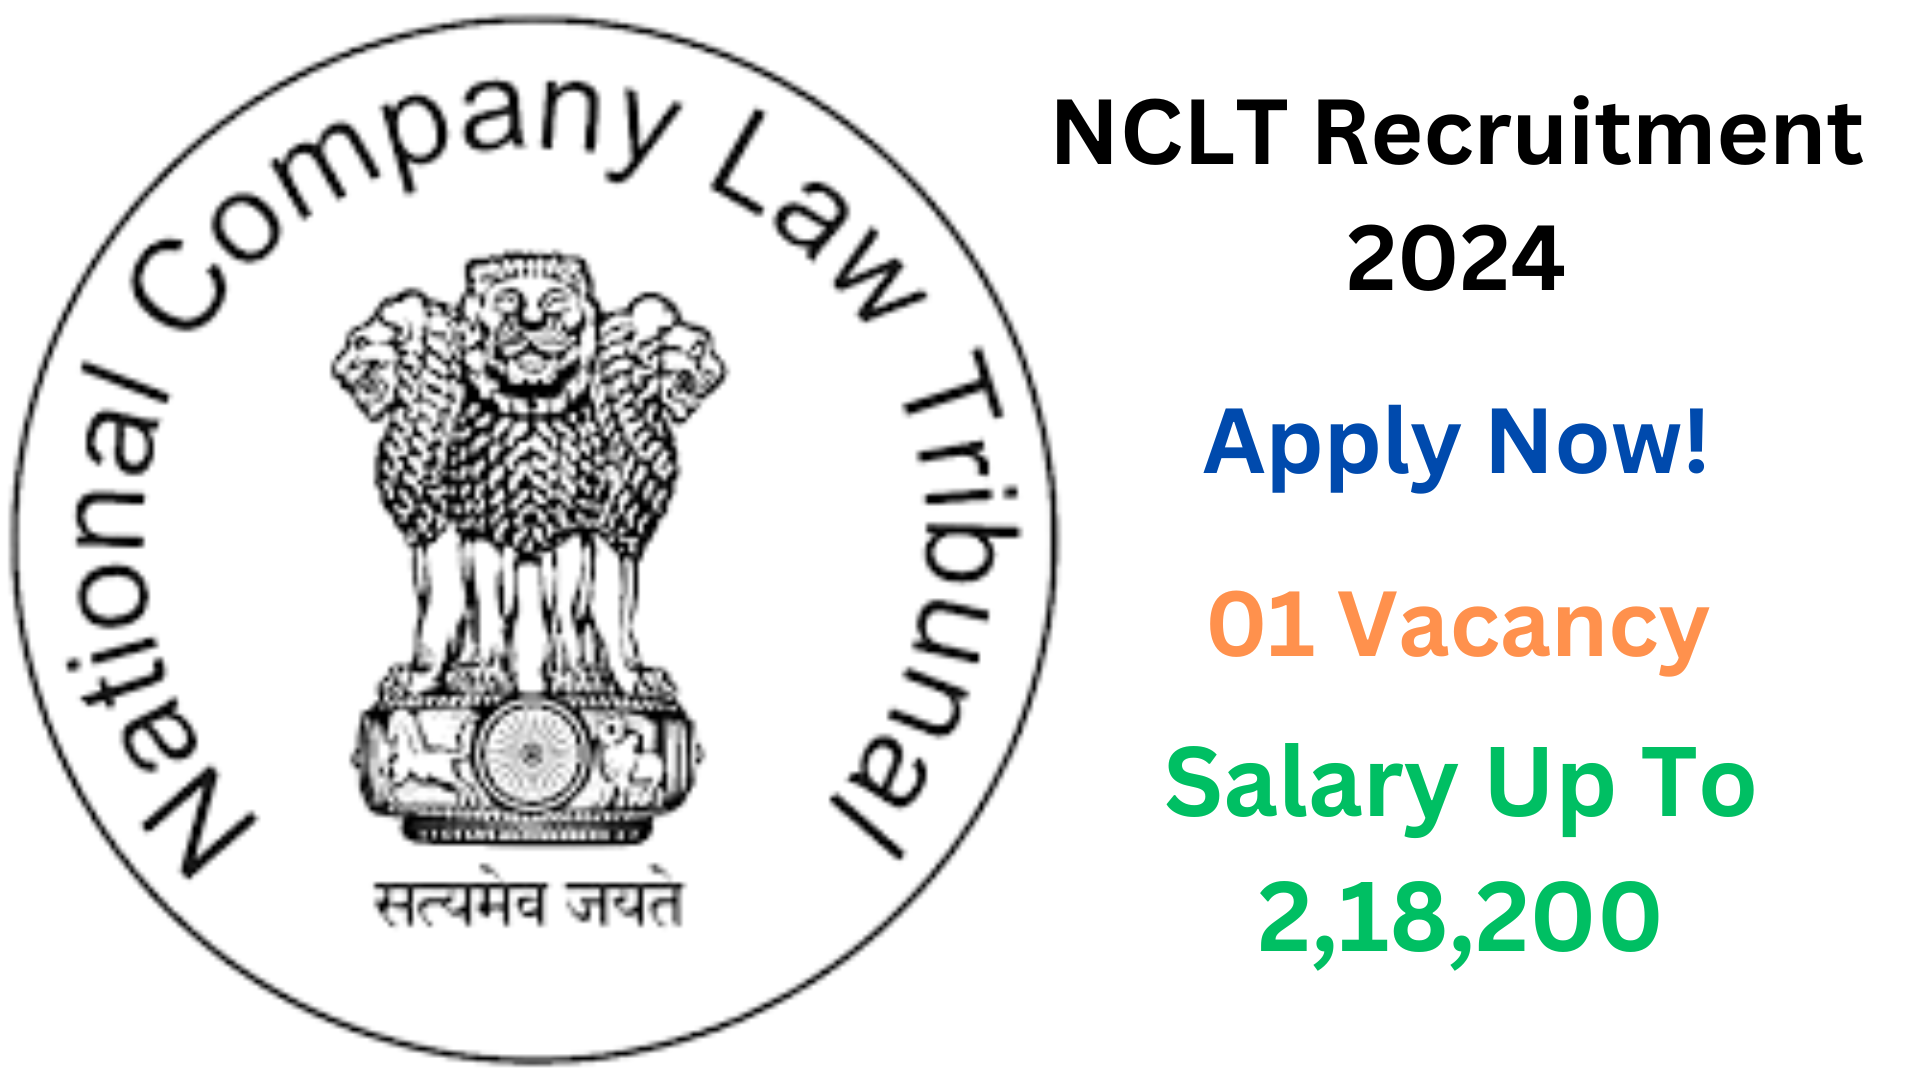 NCLT Assistant Registrar Recruitment 2024, Apply Now, Check Vacancy Details, Salary, Eligibility Criteria, and More